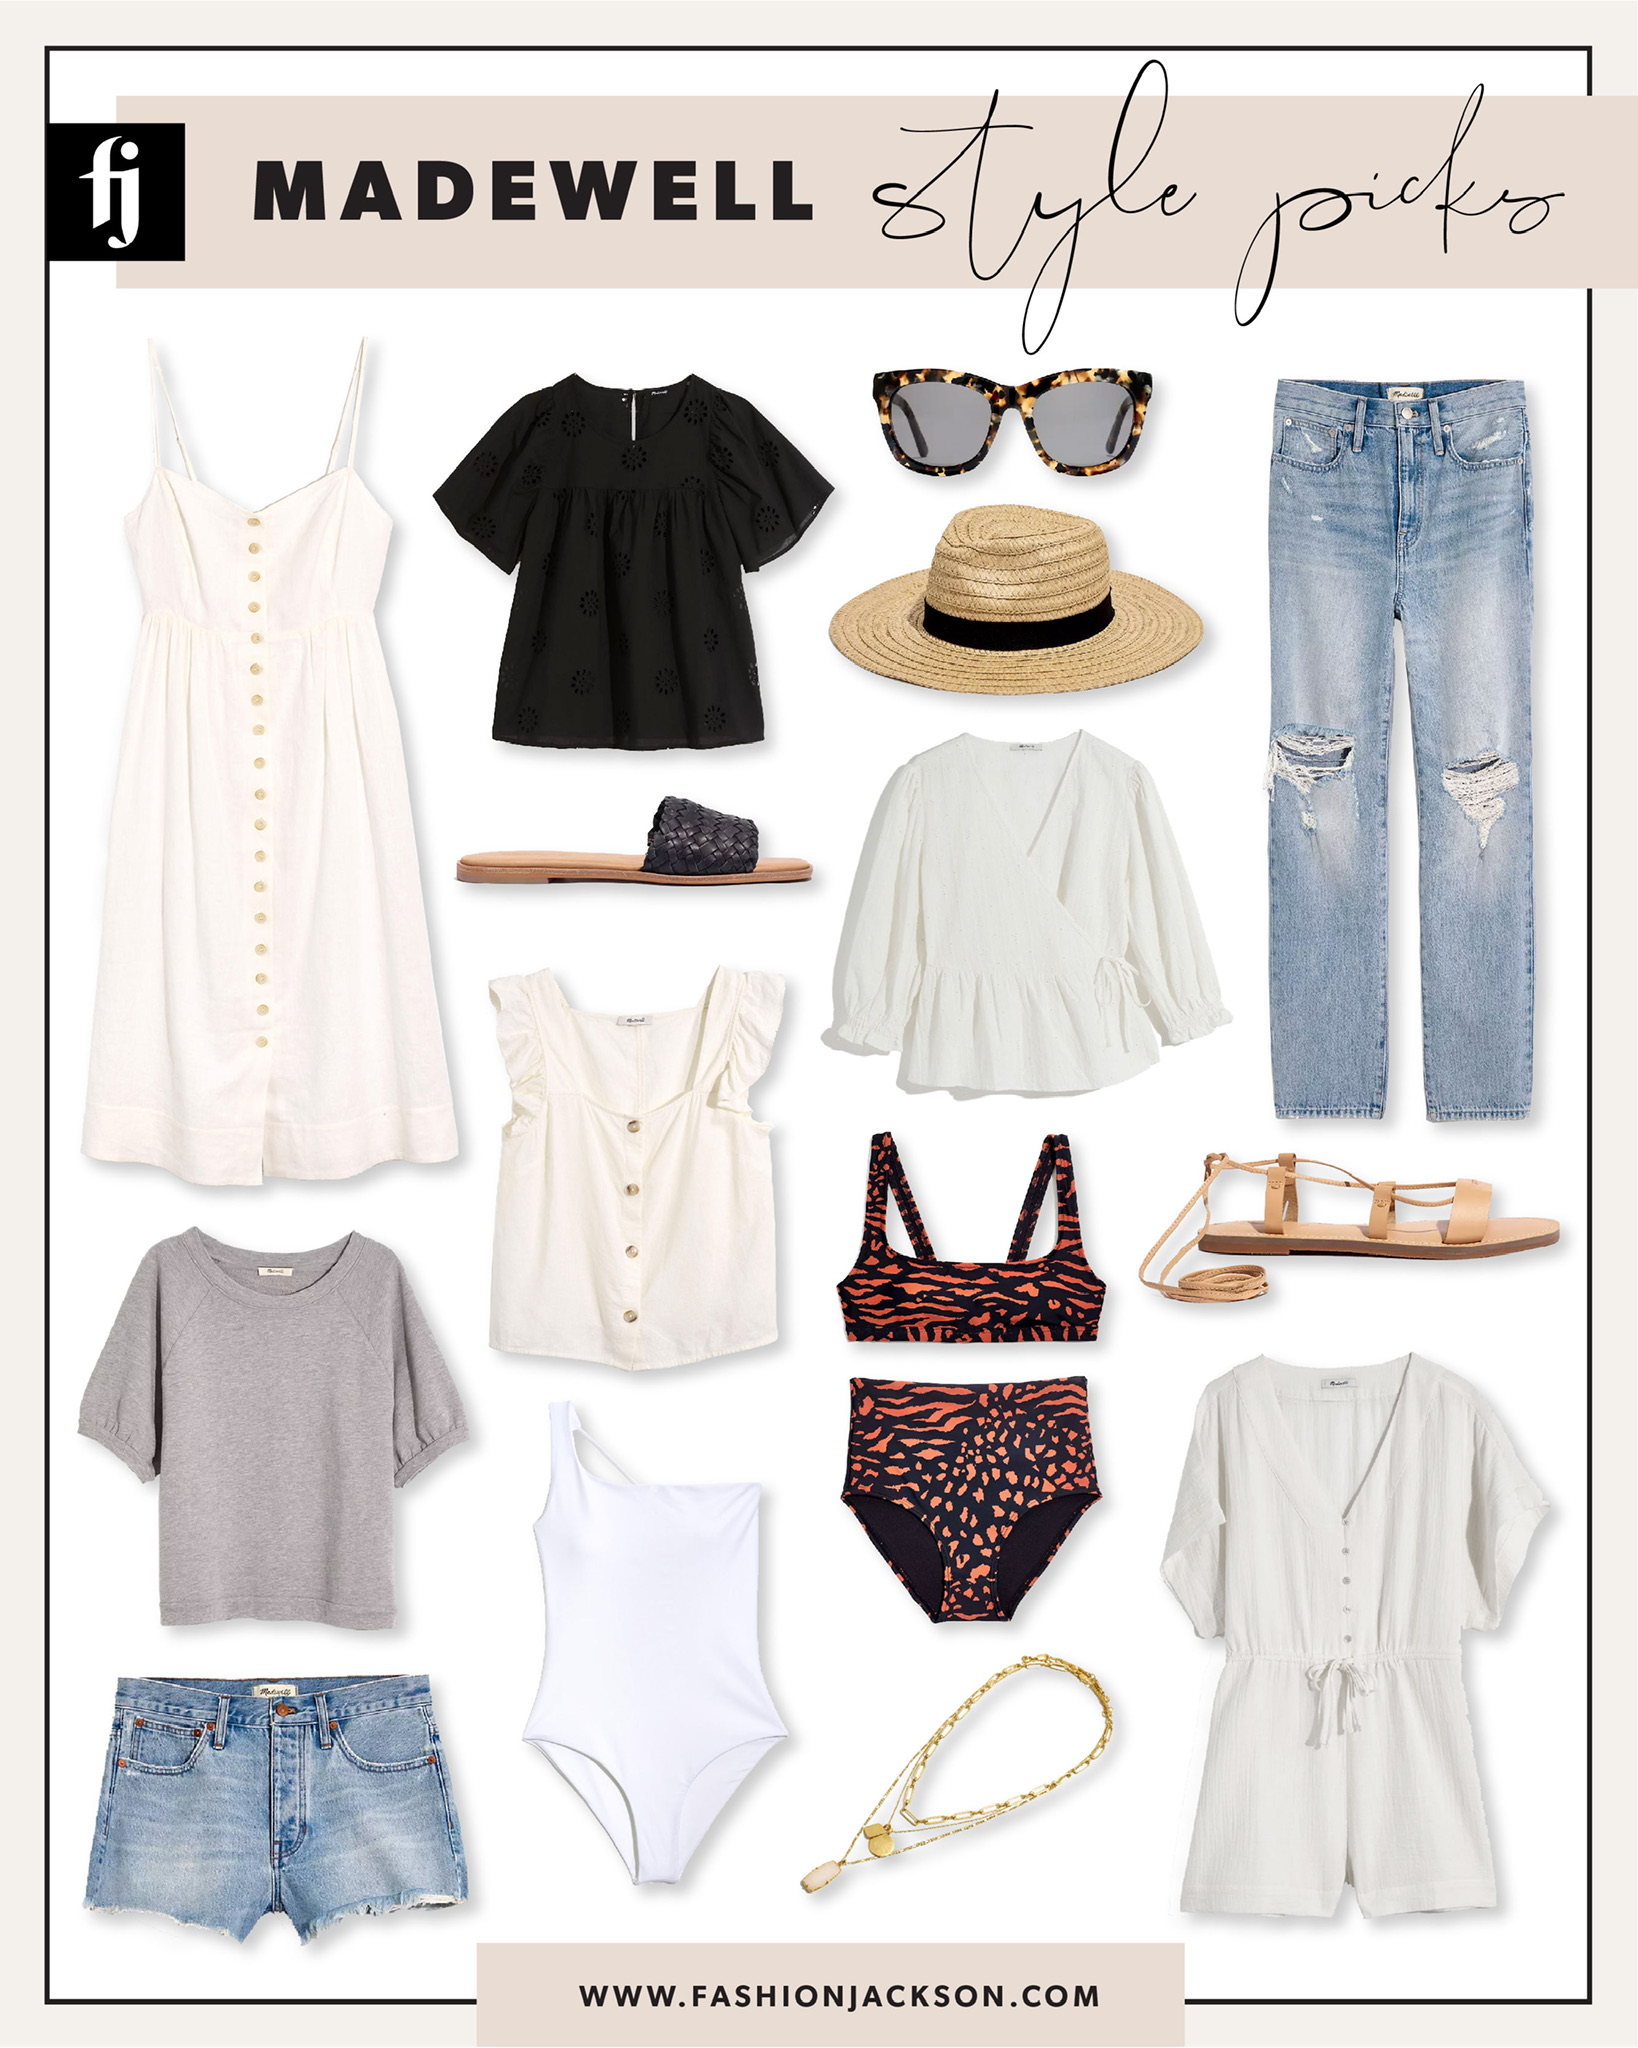 Madewell Spring Styles